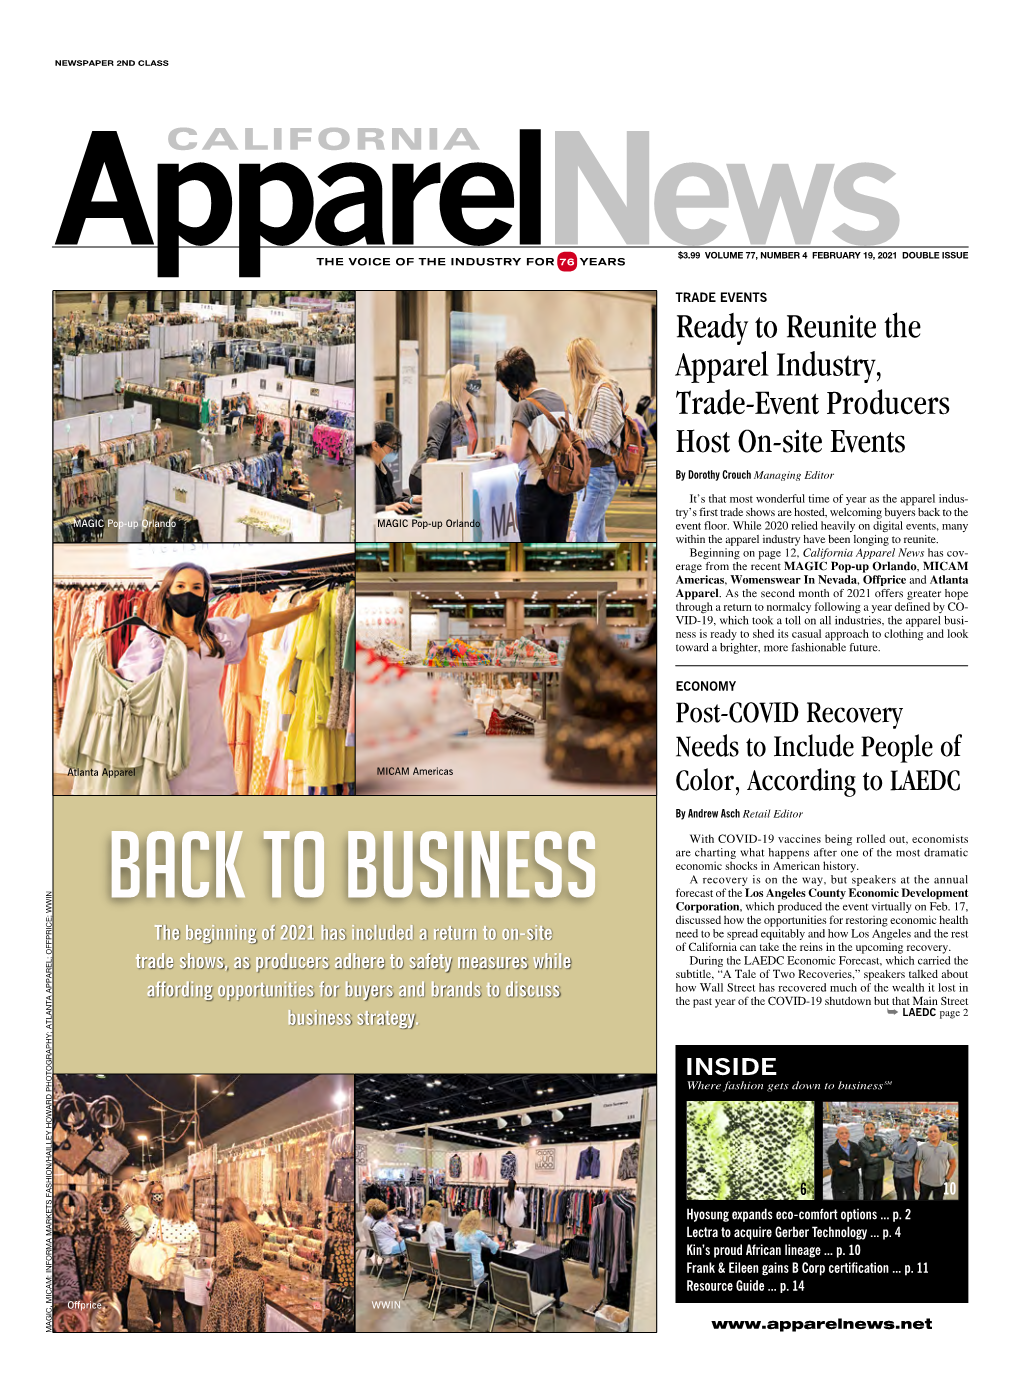 Ready to Reunite the Apparel Industry, Trade-Event Producers Host On